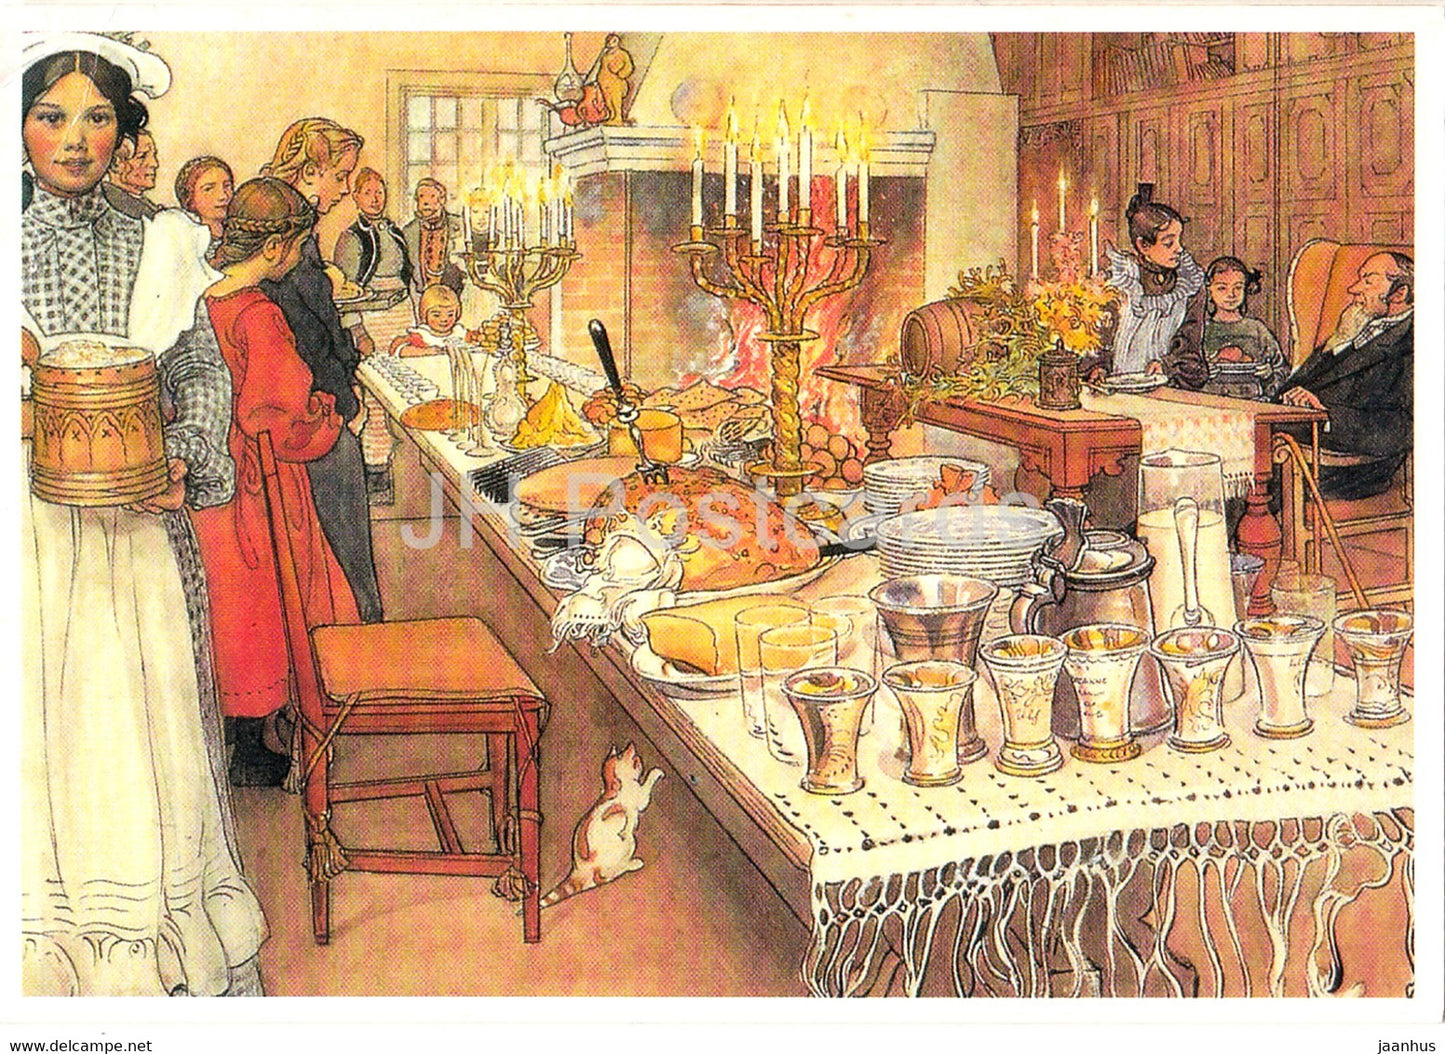 illustration by Carl Larsson - Party Table - 1996 - Germany - unused - JH Postcards